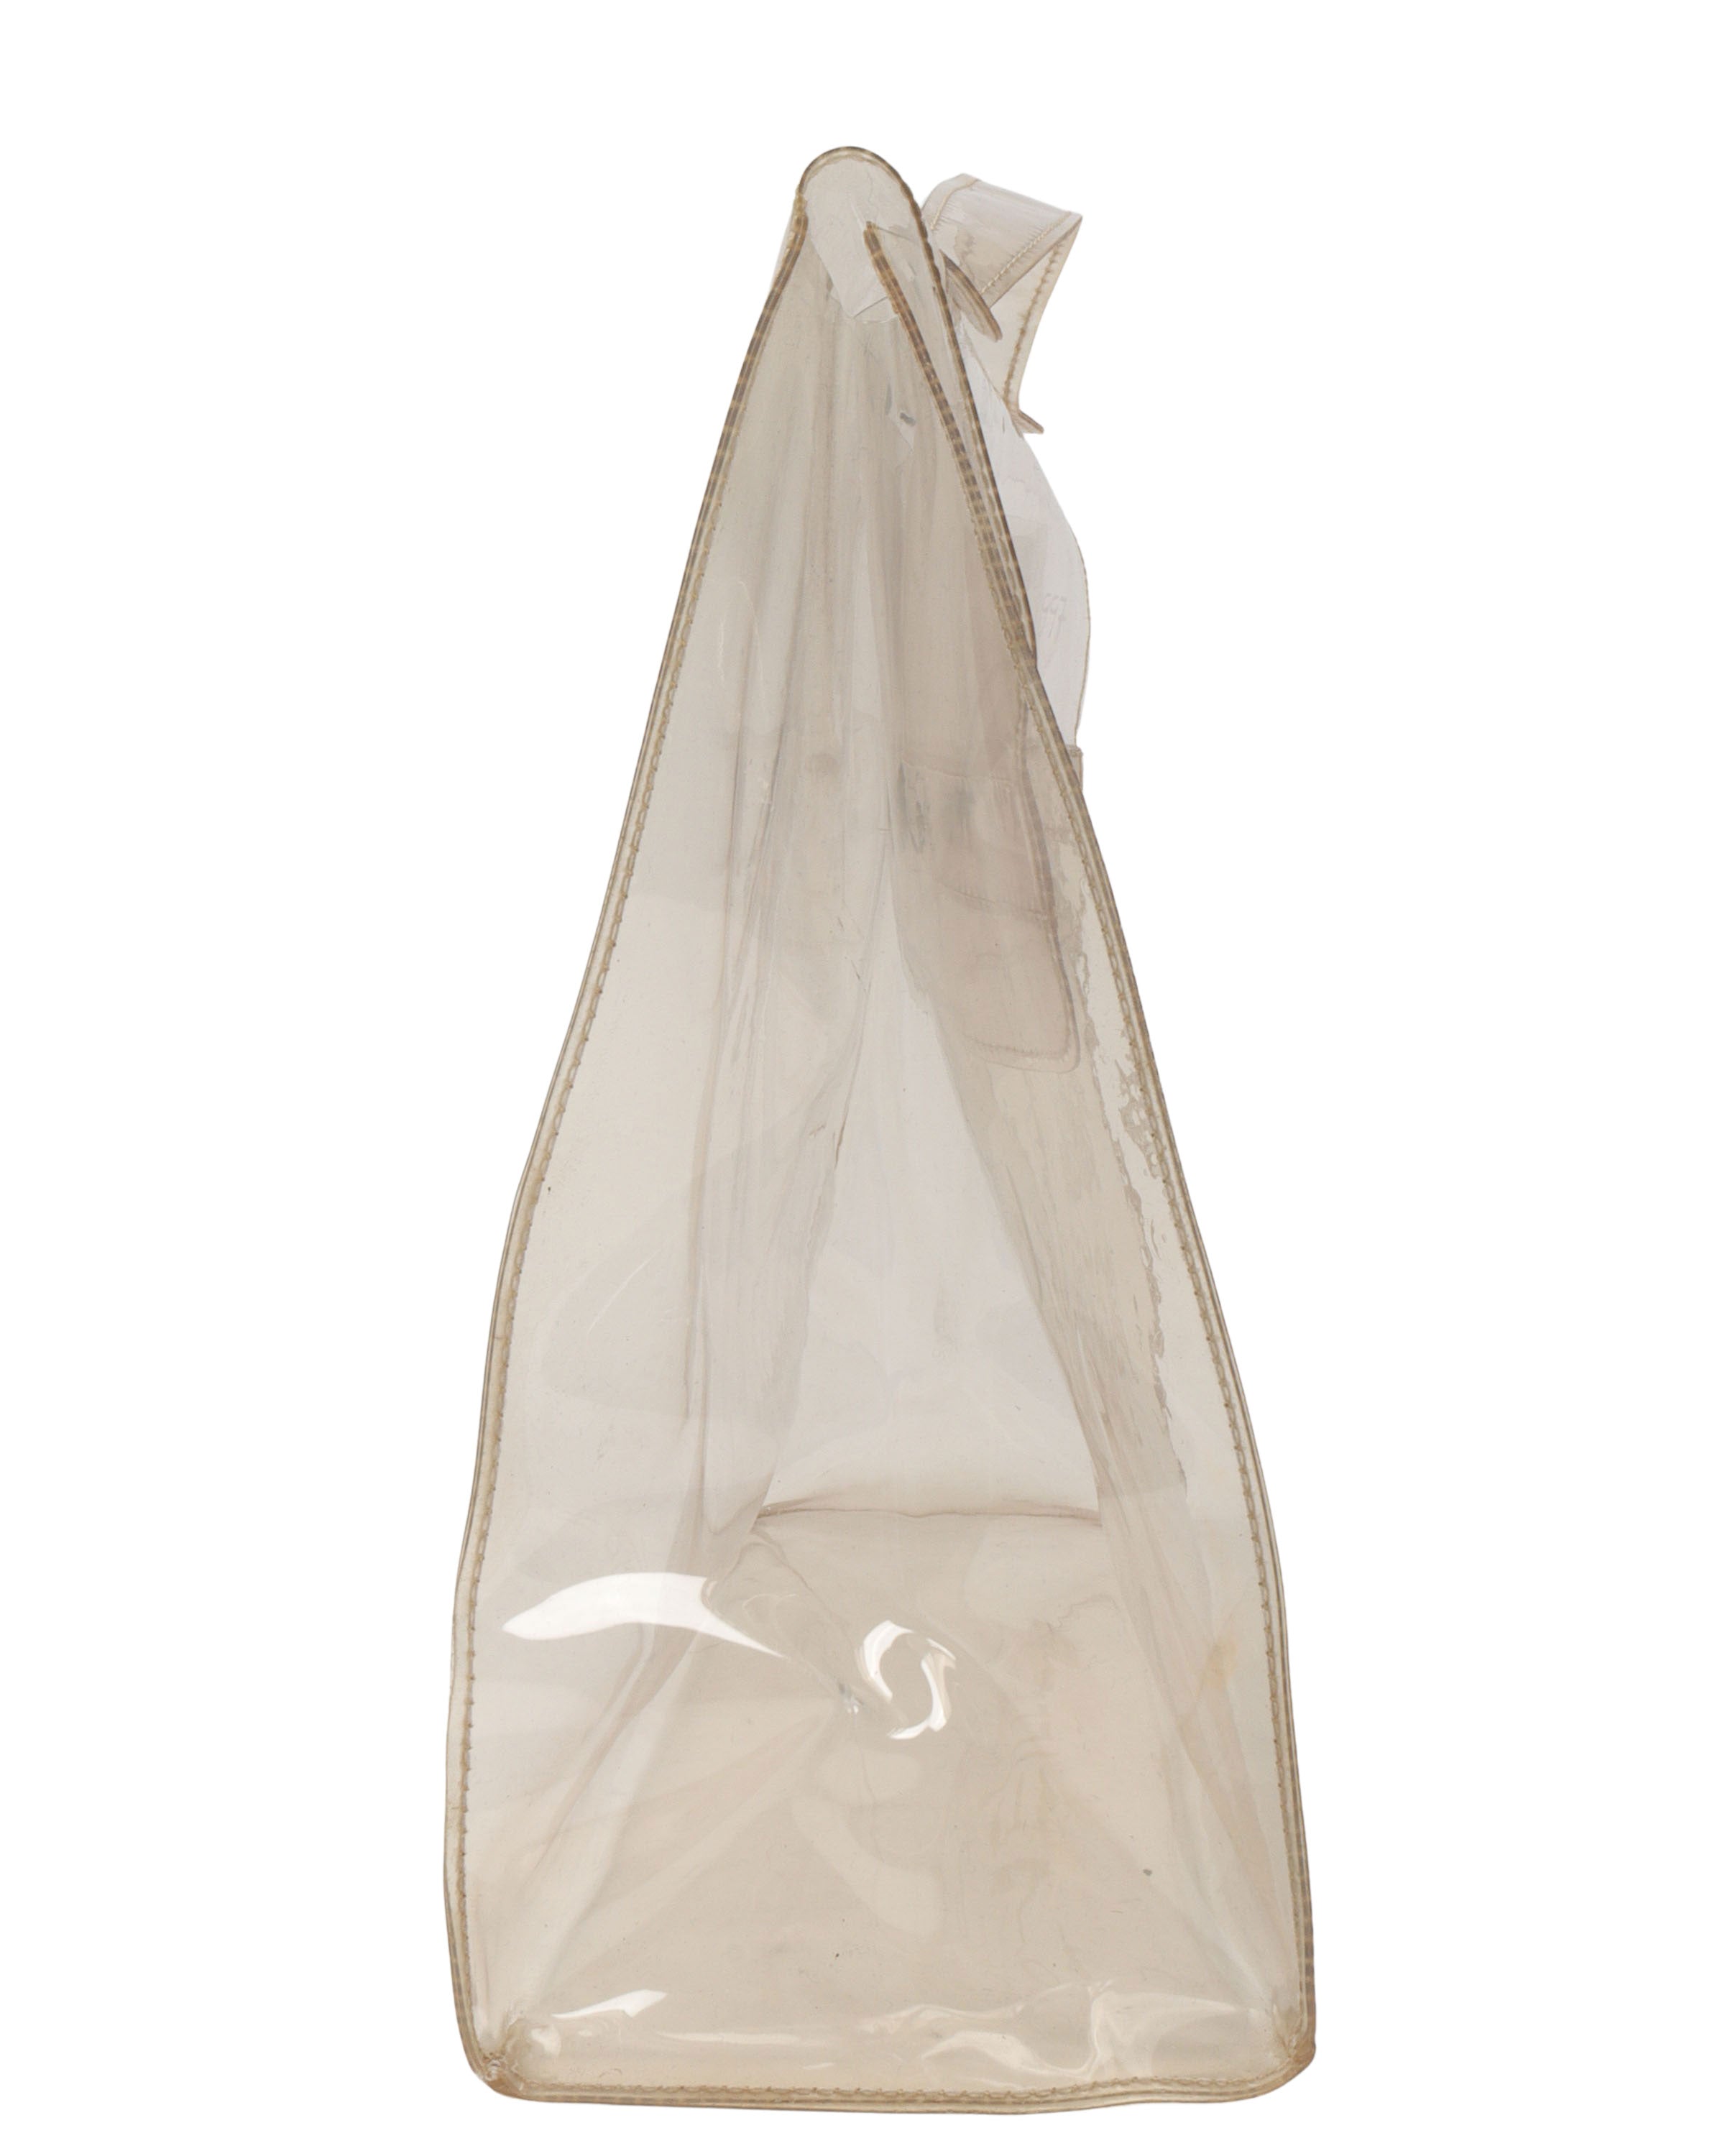 1997 Clear Promotional Kelly Bag